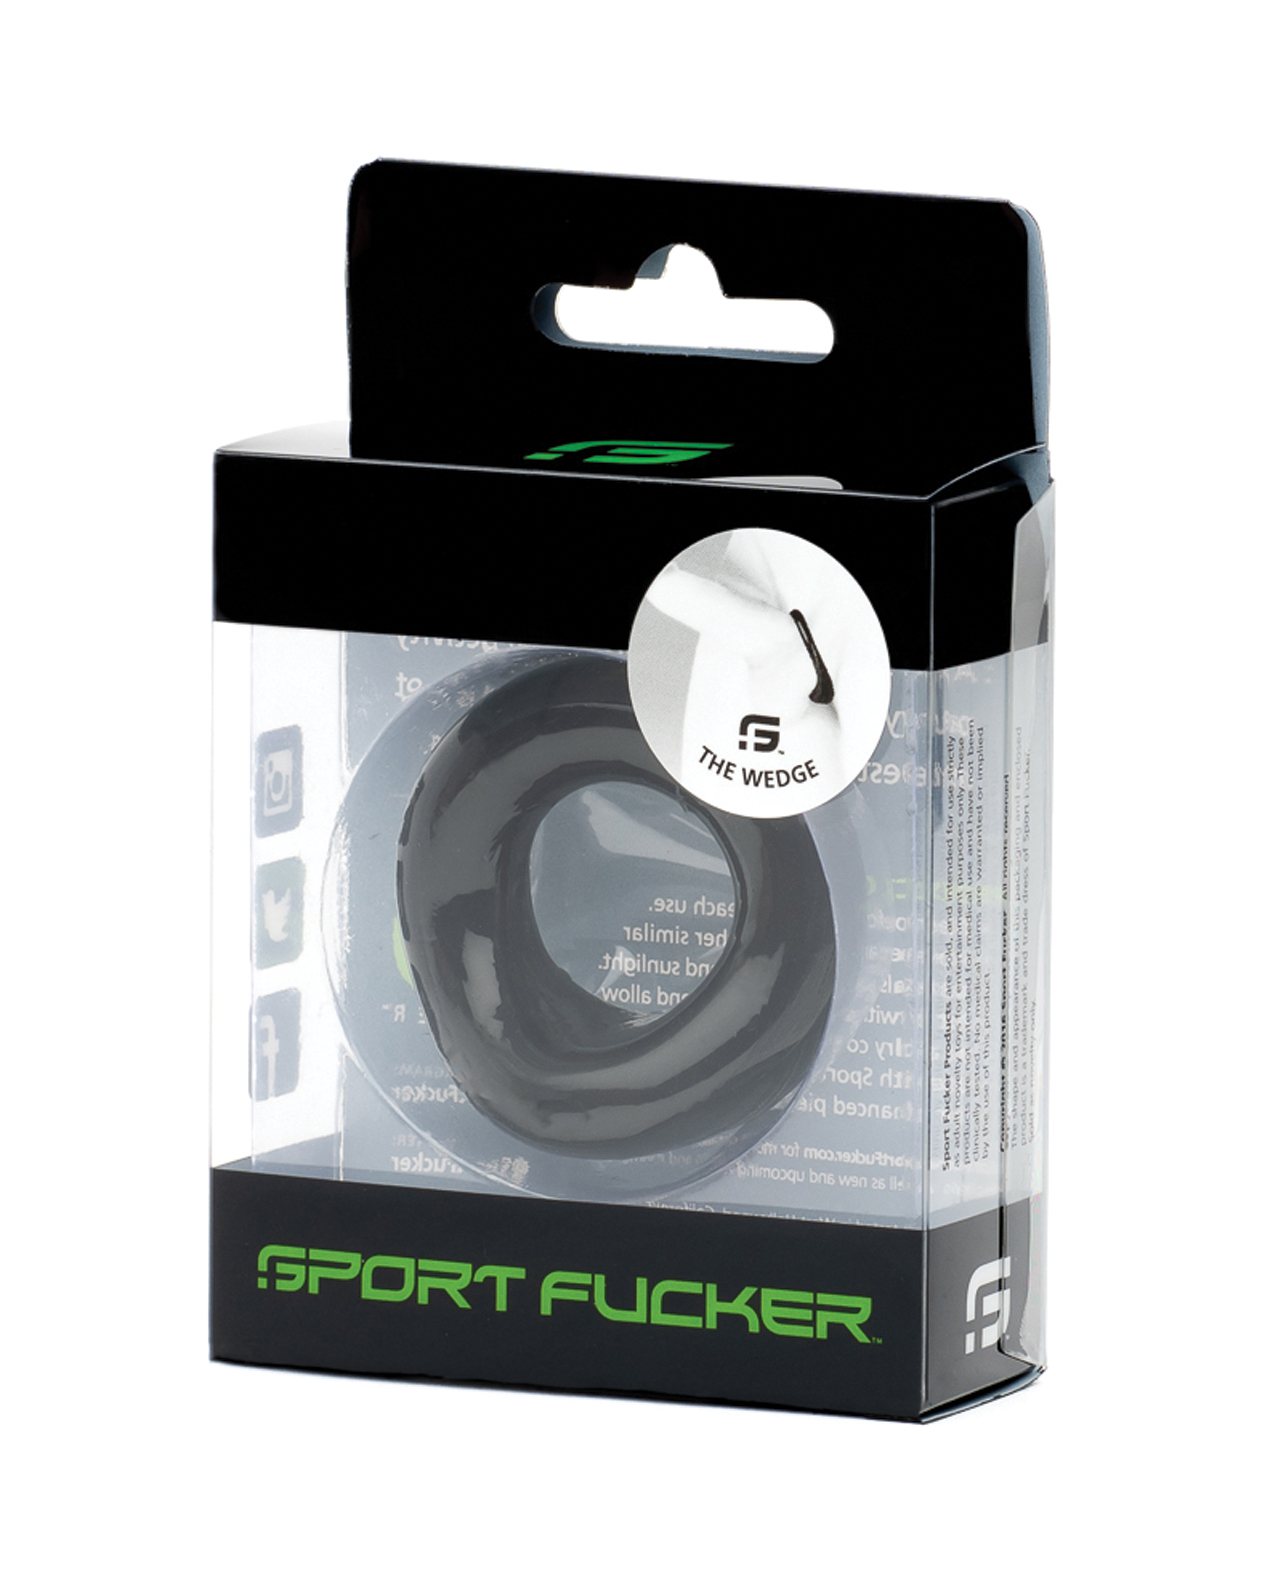 Sport Fucker Silicone The Wedge cock ring in Black in a clear and black package that says Sports Fucker in Green along the bottom